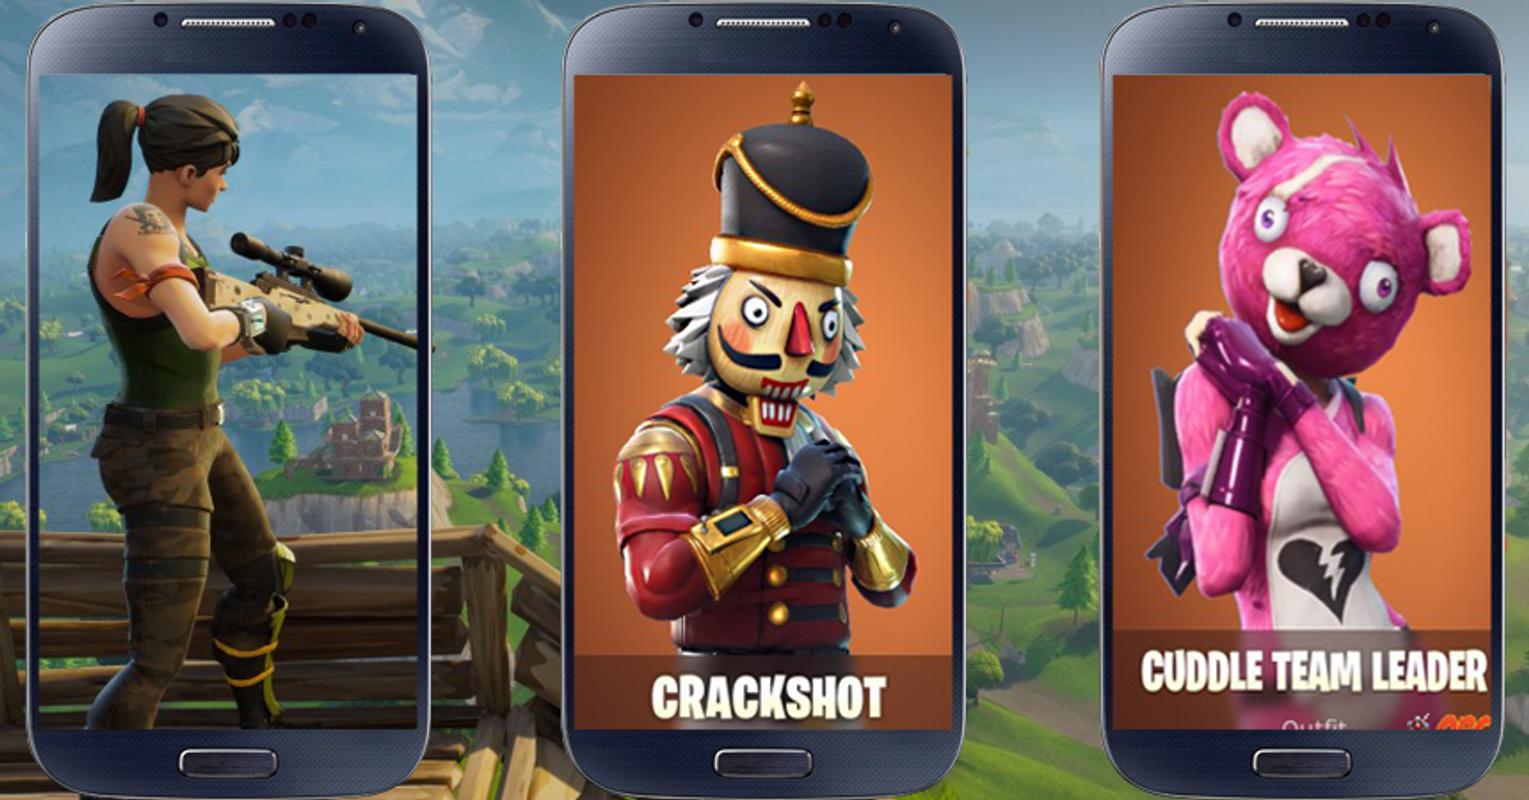 Fornite Battle Skins Free Wallpepers for Android - APK ...